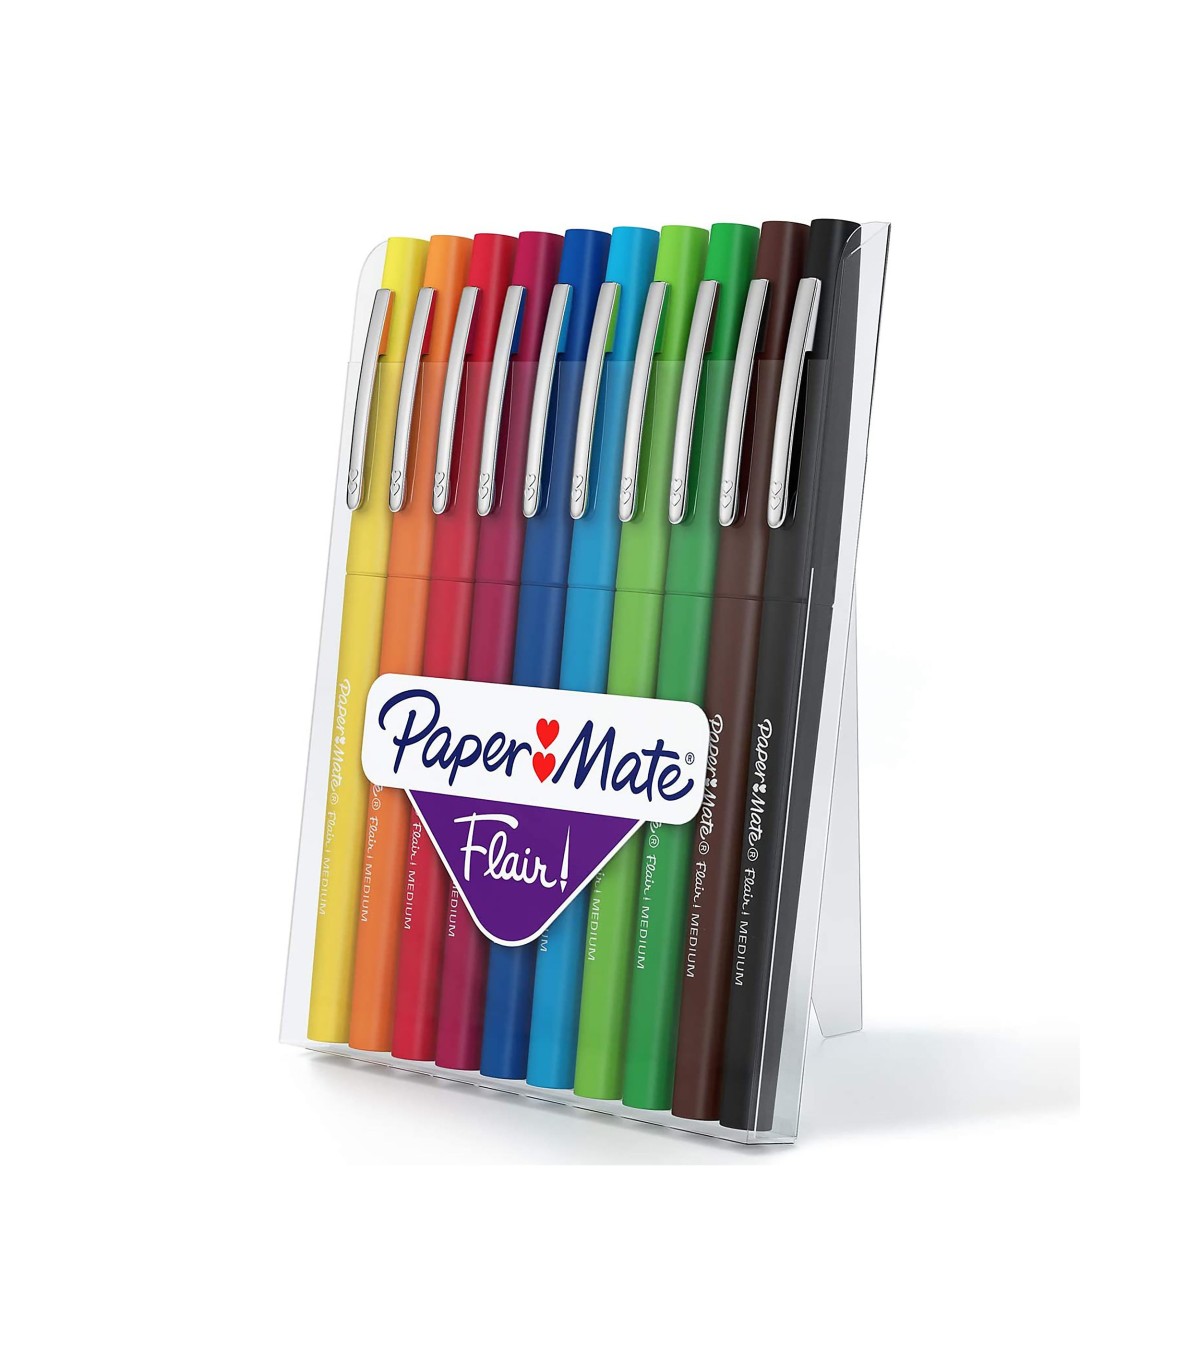  Paper Mate Flair Felt Tip Pen - Medium Point - Tropical  Vacation - 6 Color Set - Limited Edition